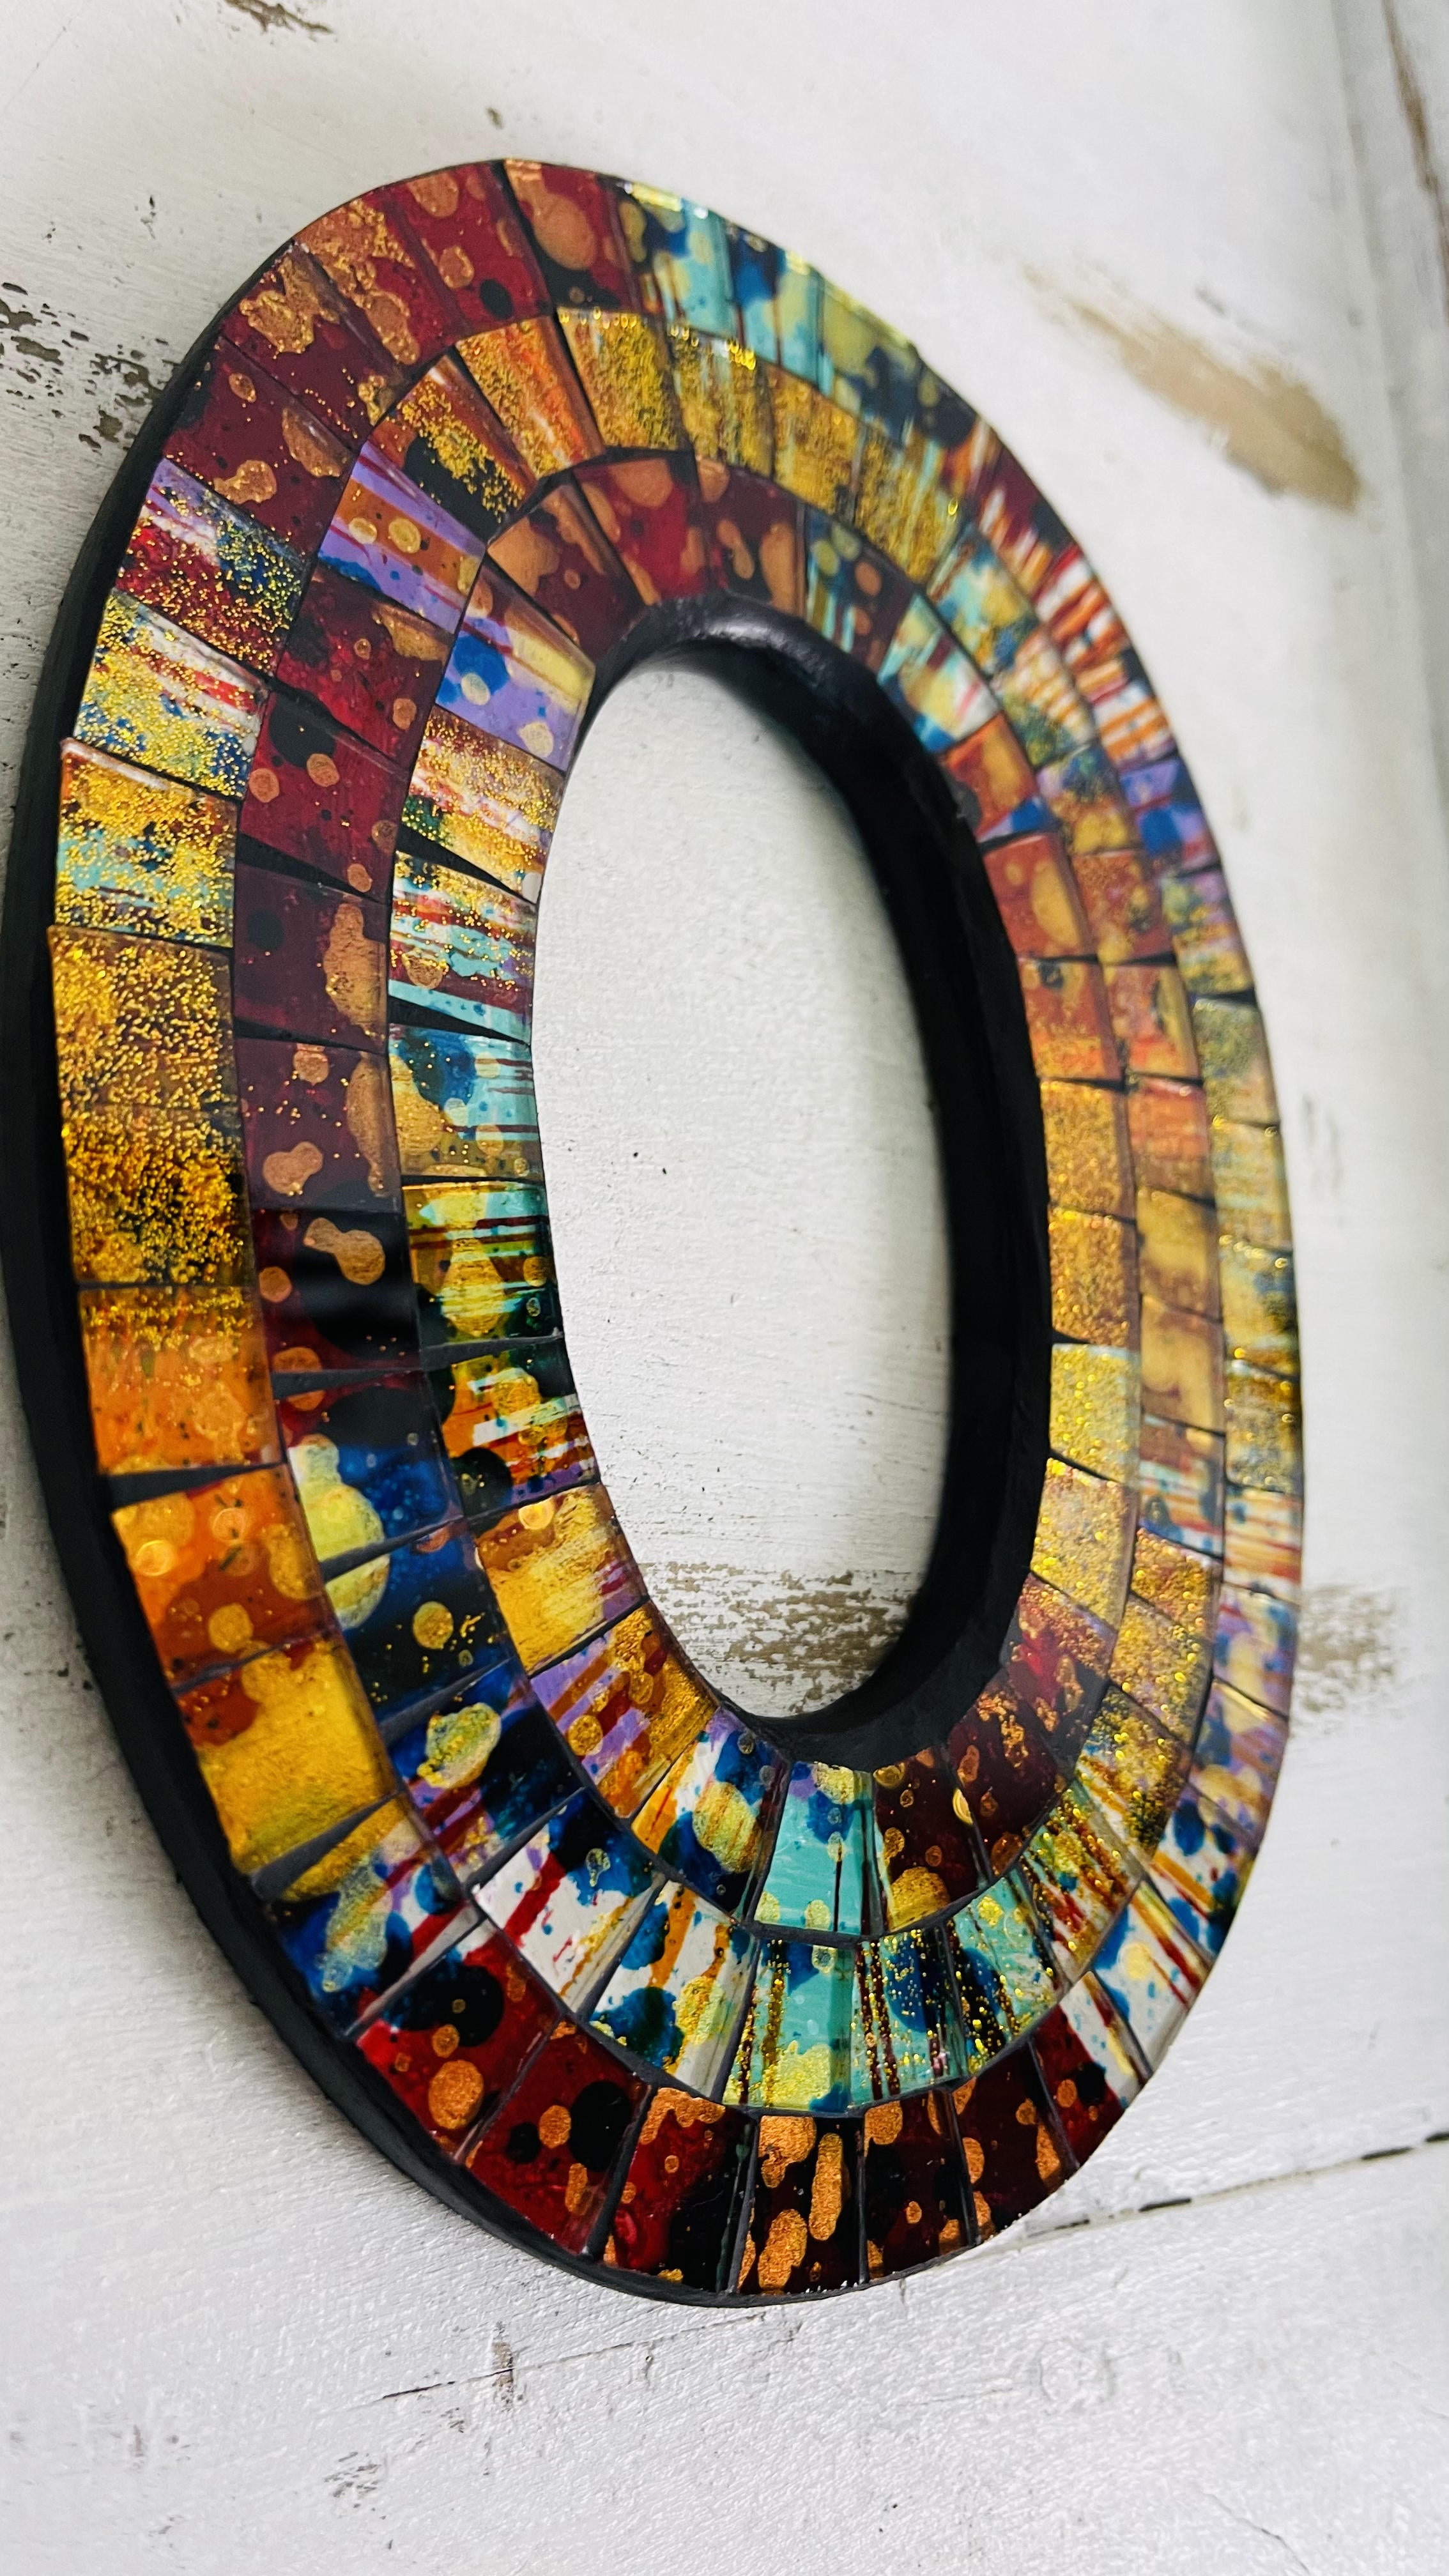 close up pf letter O from mosaic love wall art